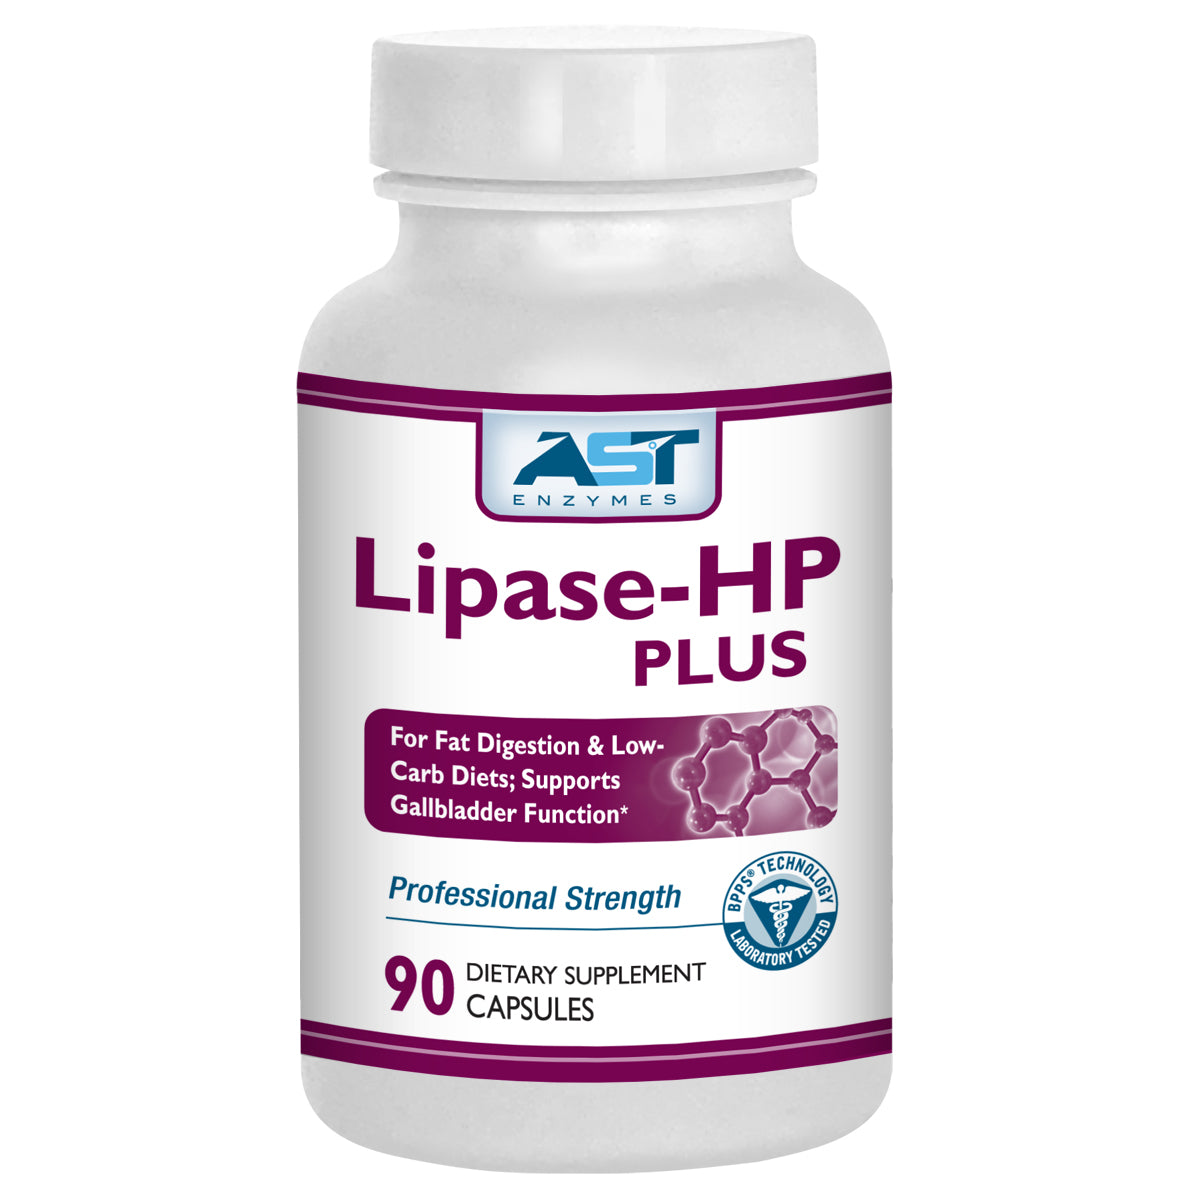 AST Enzymes Lipase-HP